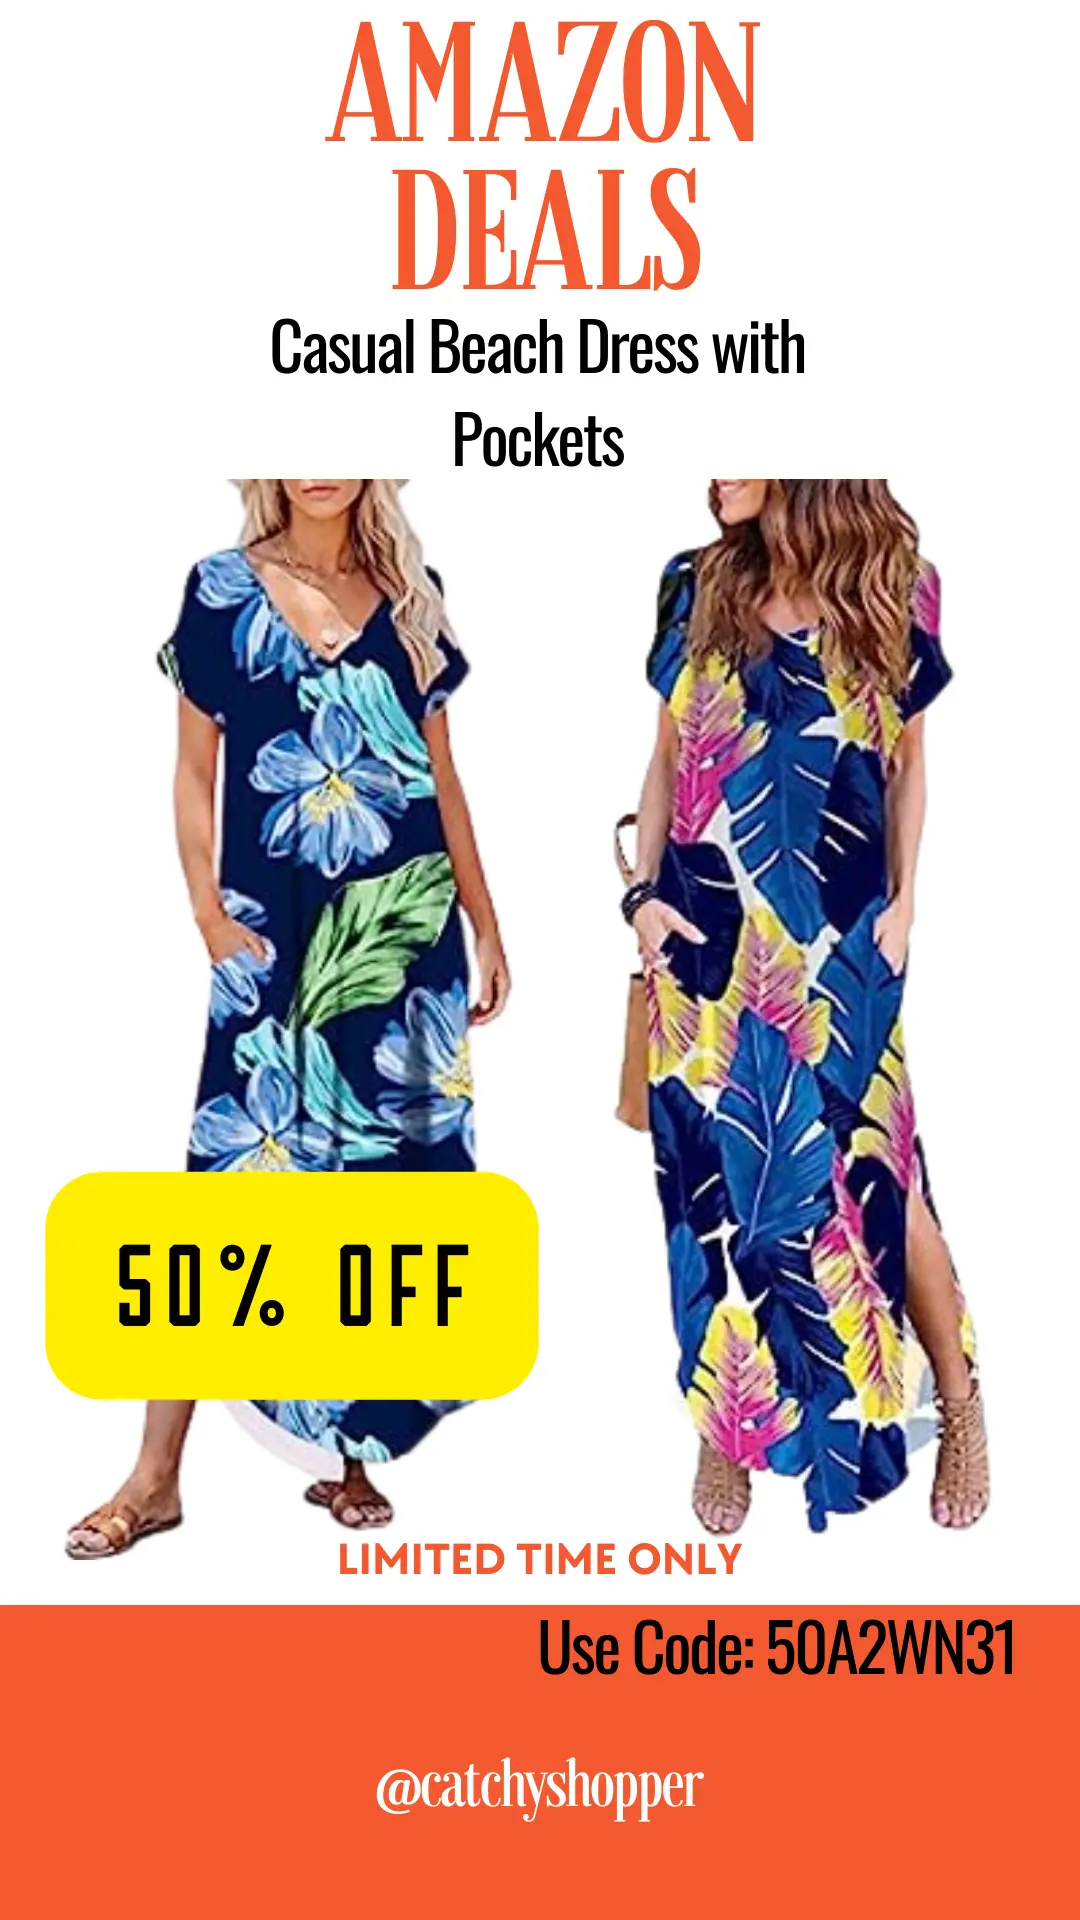 Casual Beach Dress with Pockets